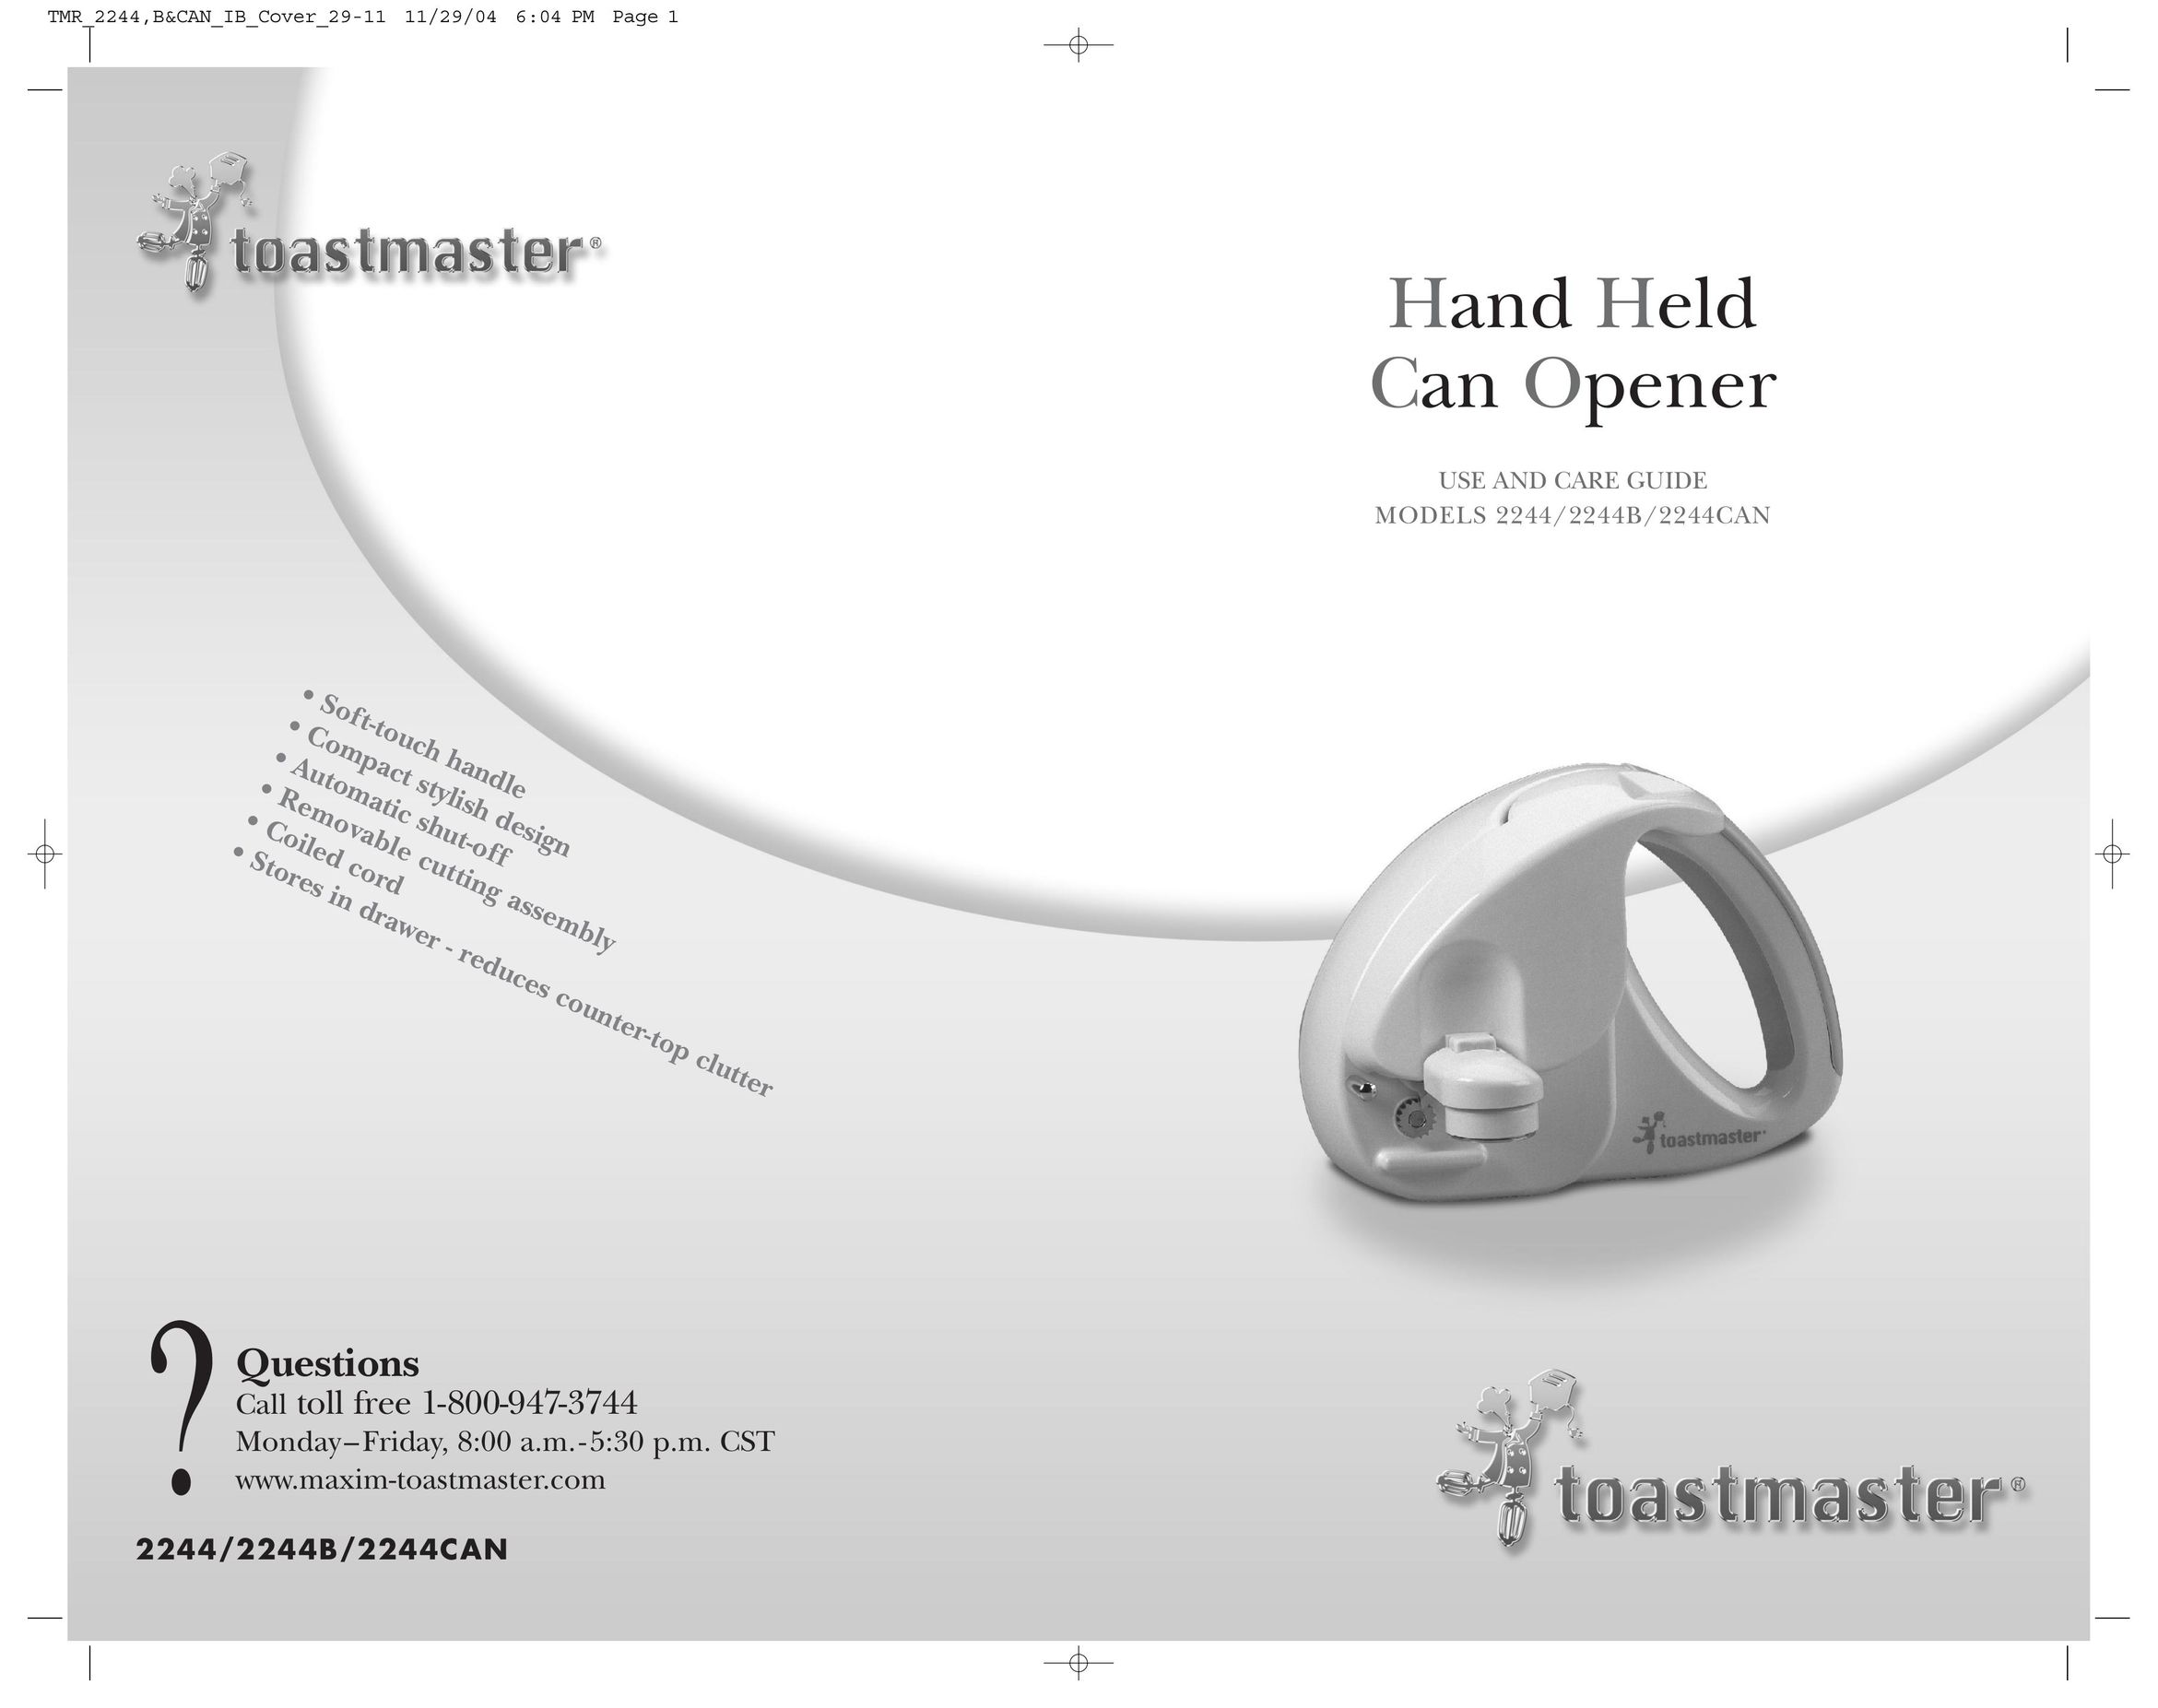 Toastmaster 2244, 2244B, 2244 Can Opener User Manual